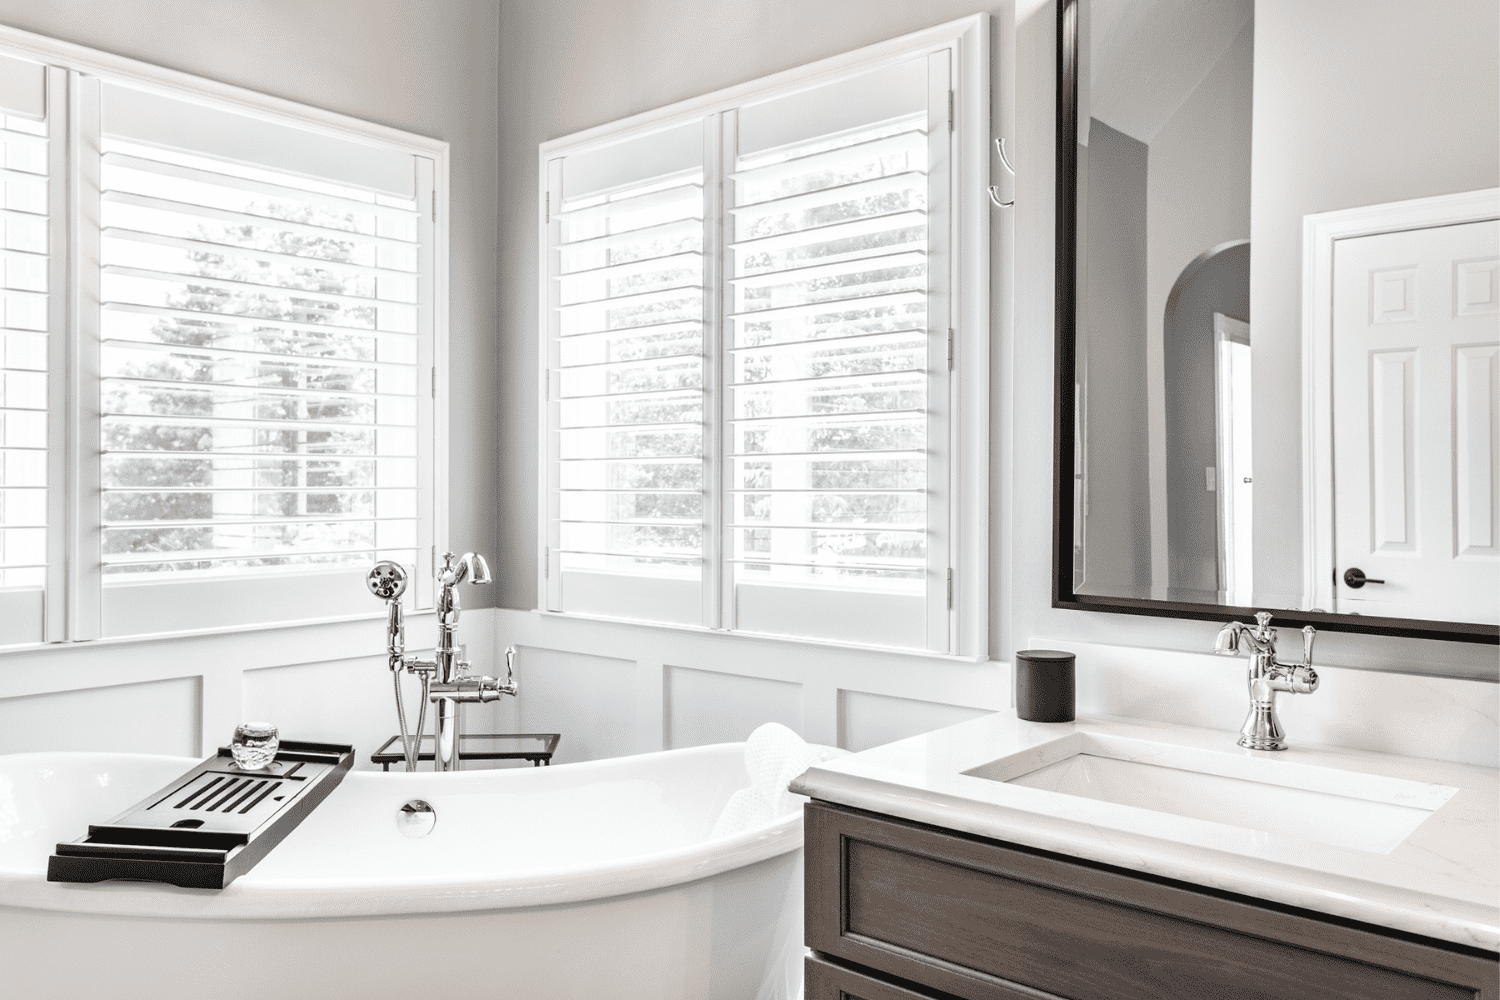 Nicholas Design Build | Master bath remodel: A black and white bathroom with a tub and sink.